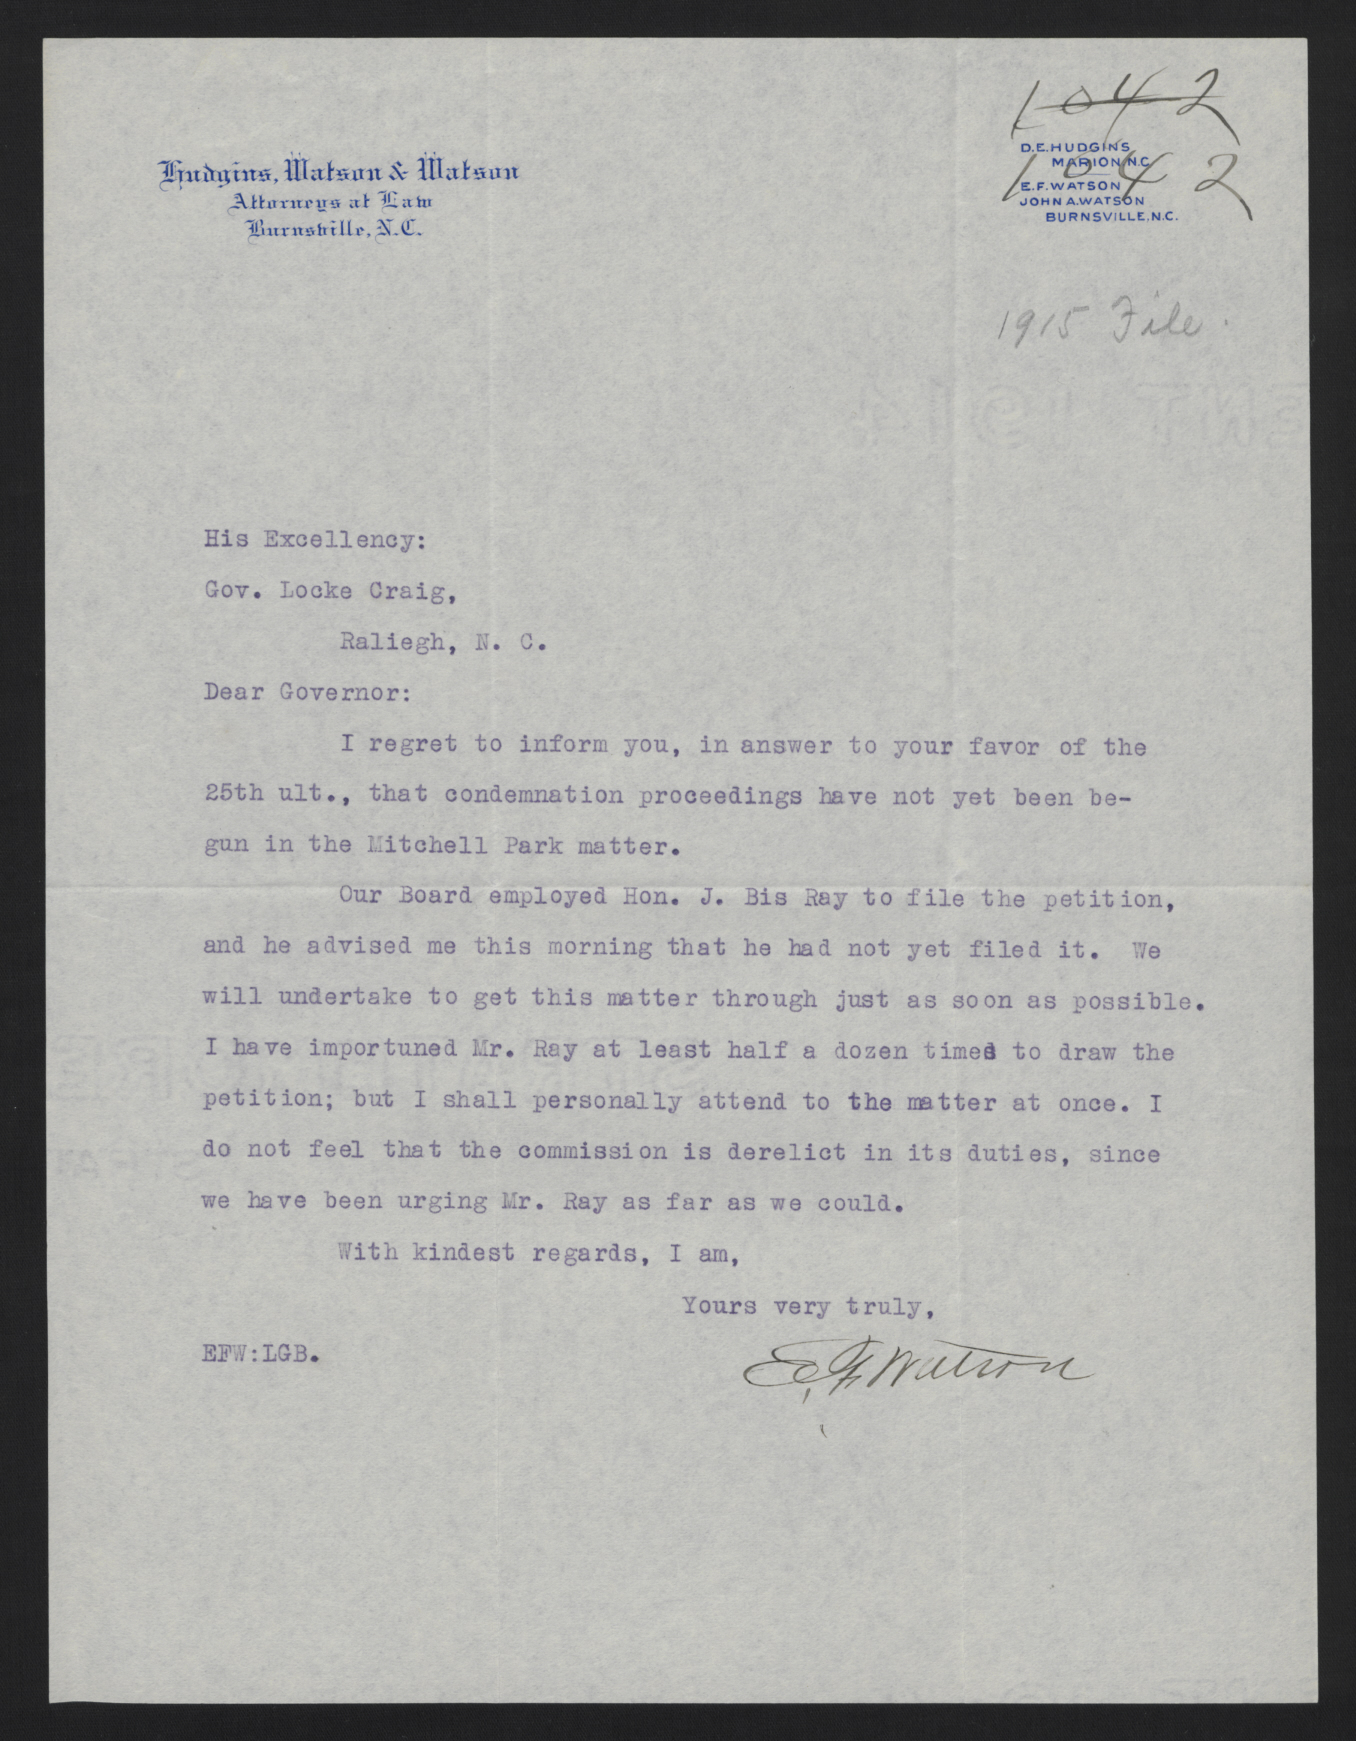 Letter from Watson to Craig, circa 1915